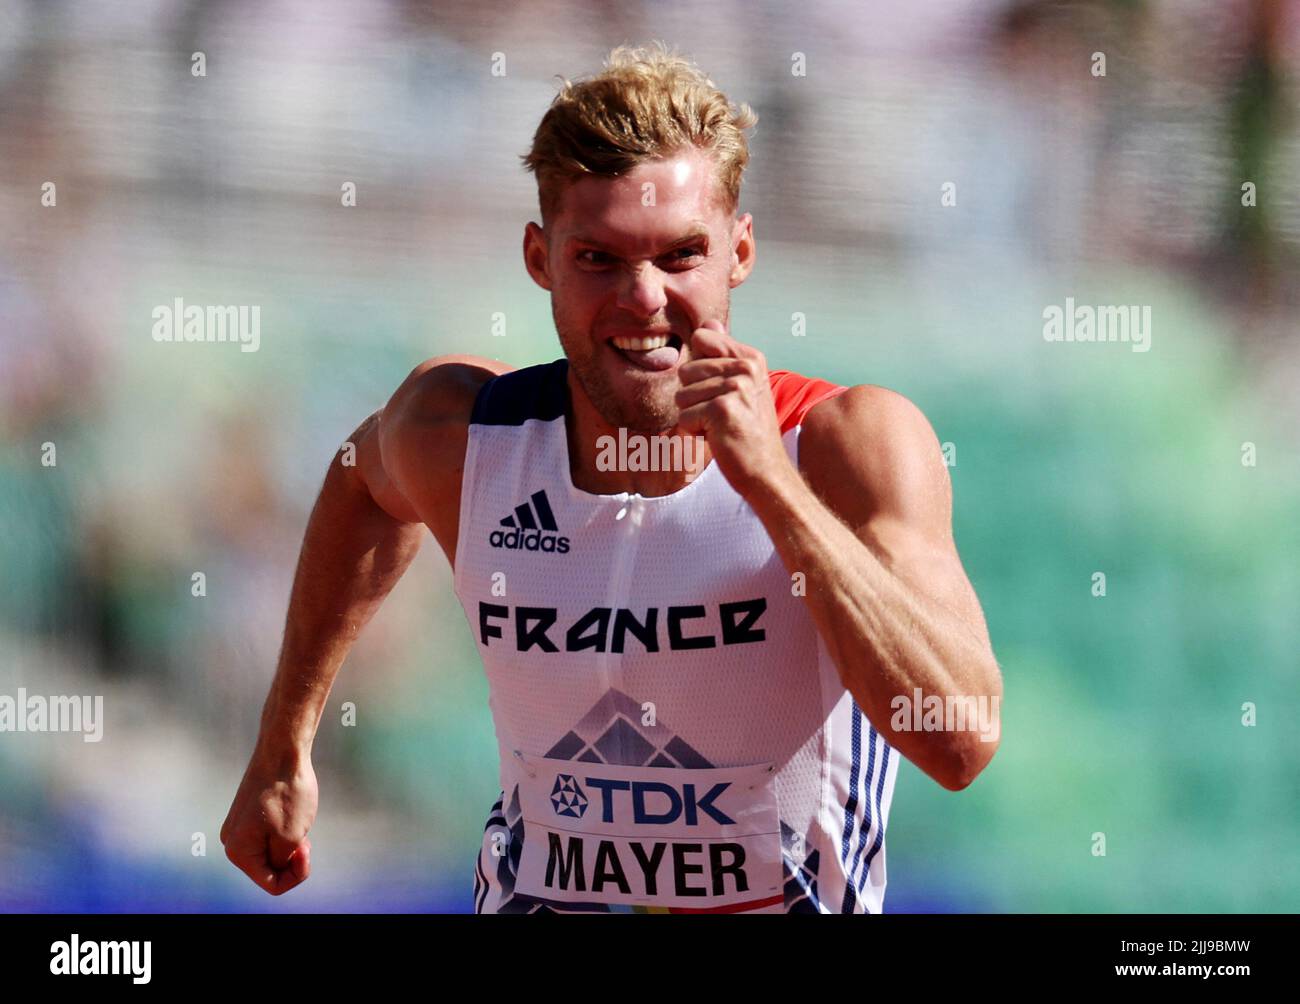 Athletics - World Athletics Championships - Men's 110 Metres Hurdles - Decathlon - Hayward Field, Eugene, Oregon, U.S. - July 24, 2022 France's Kevin Mayer in action during his heat REUTERS/Lucy Nicholson Stock Photo